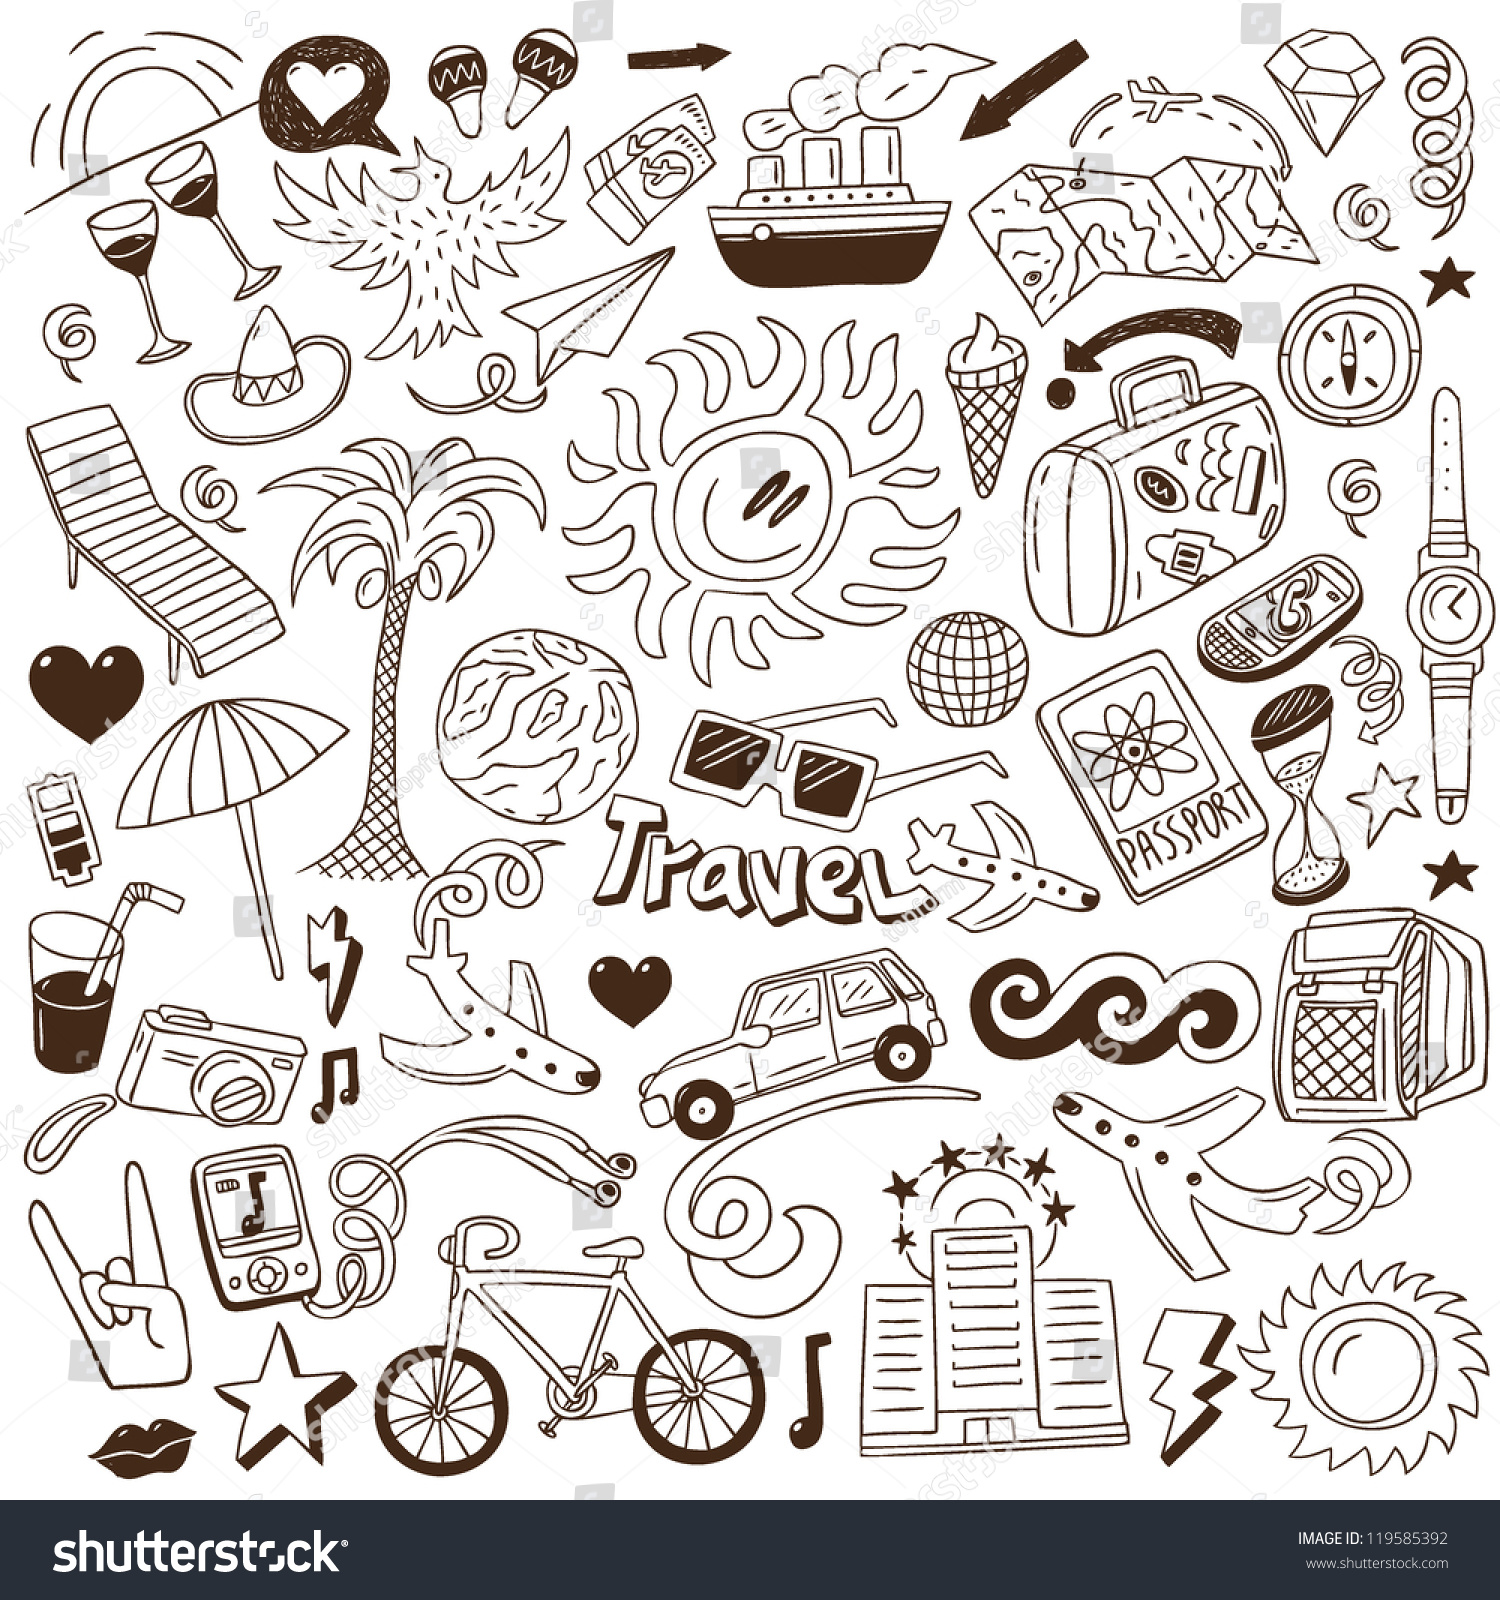 Travel Doodles Collection Stock Vector 119585392 - Shutterstock